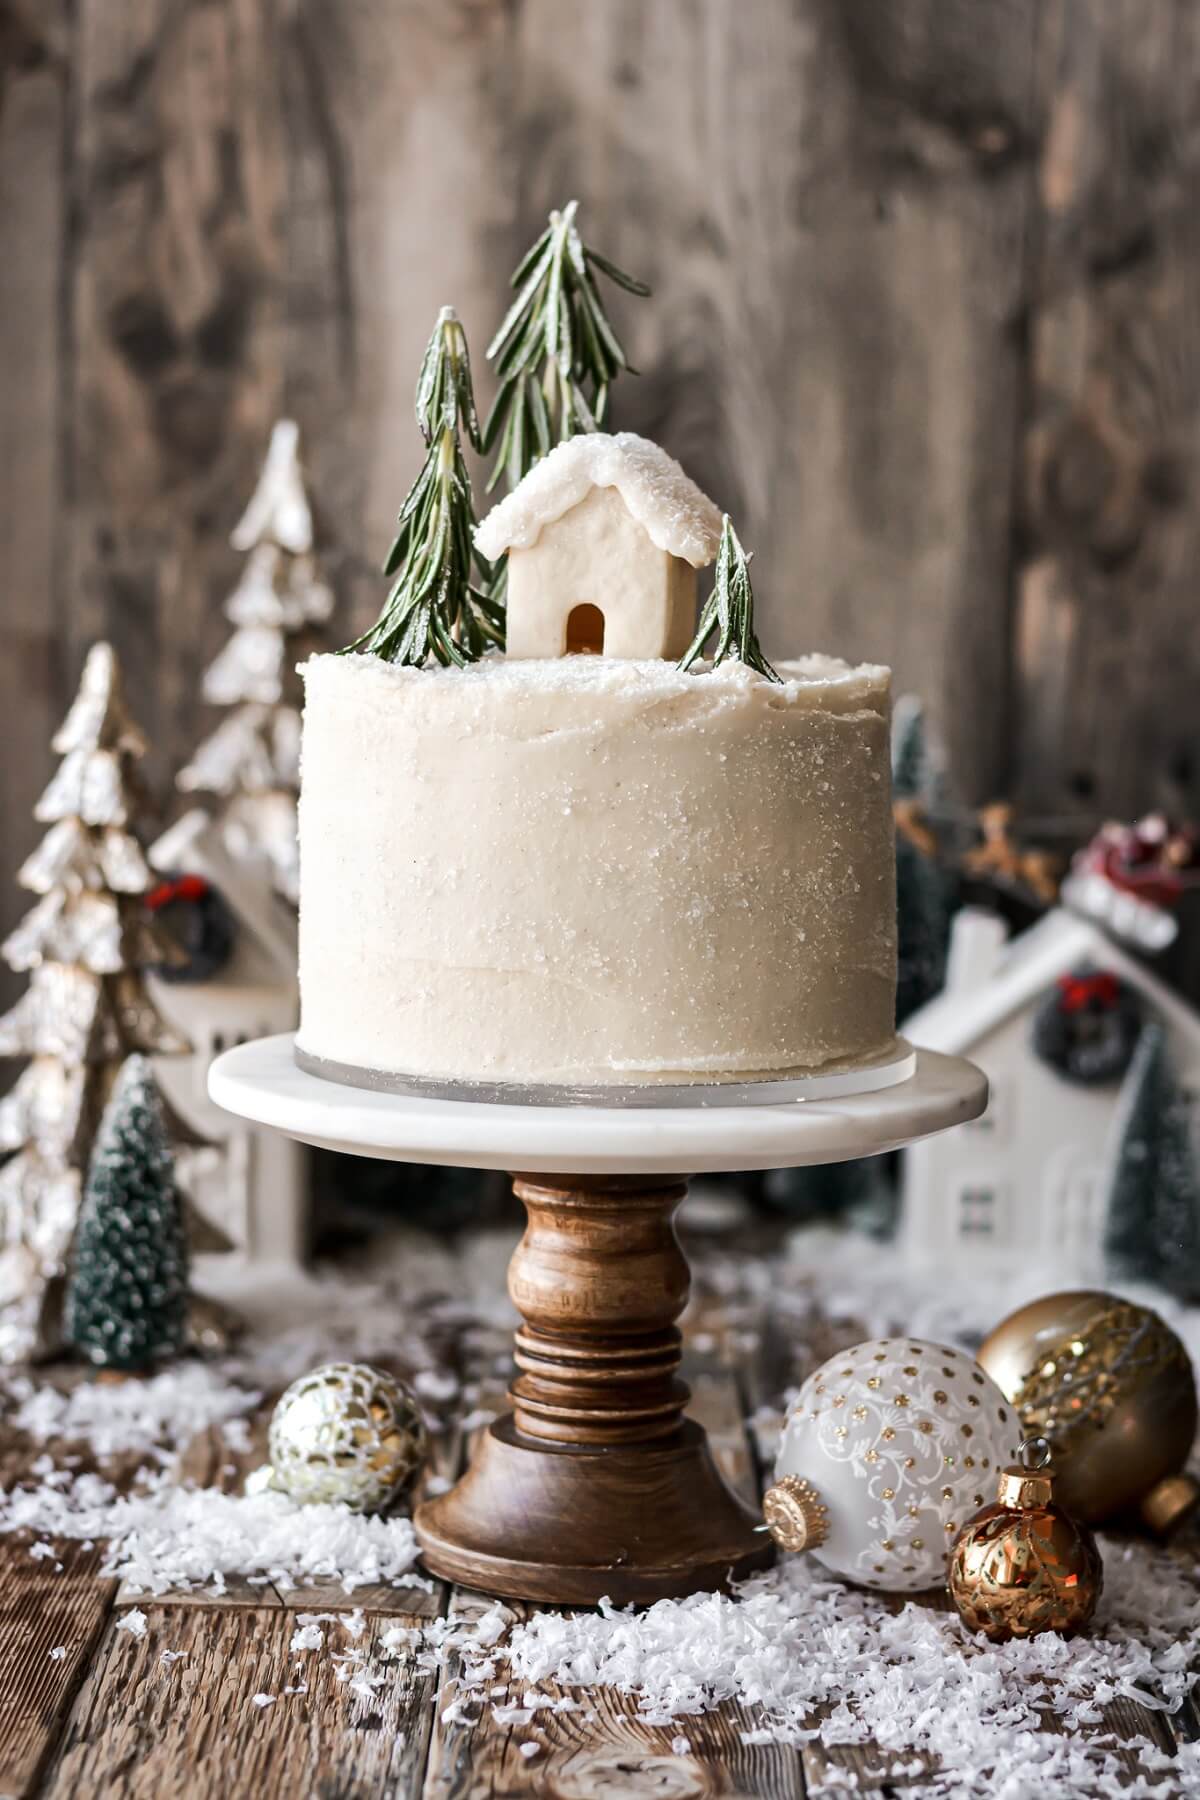 Gingerbread cake topped with rosemary trees and a mini cookie house.